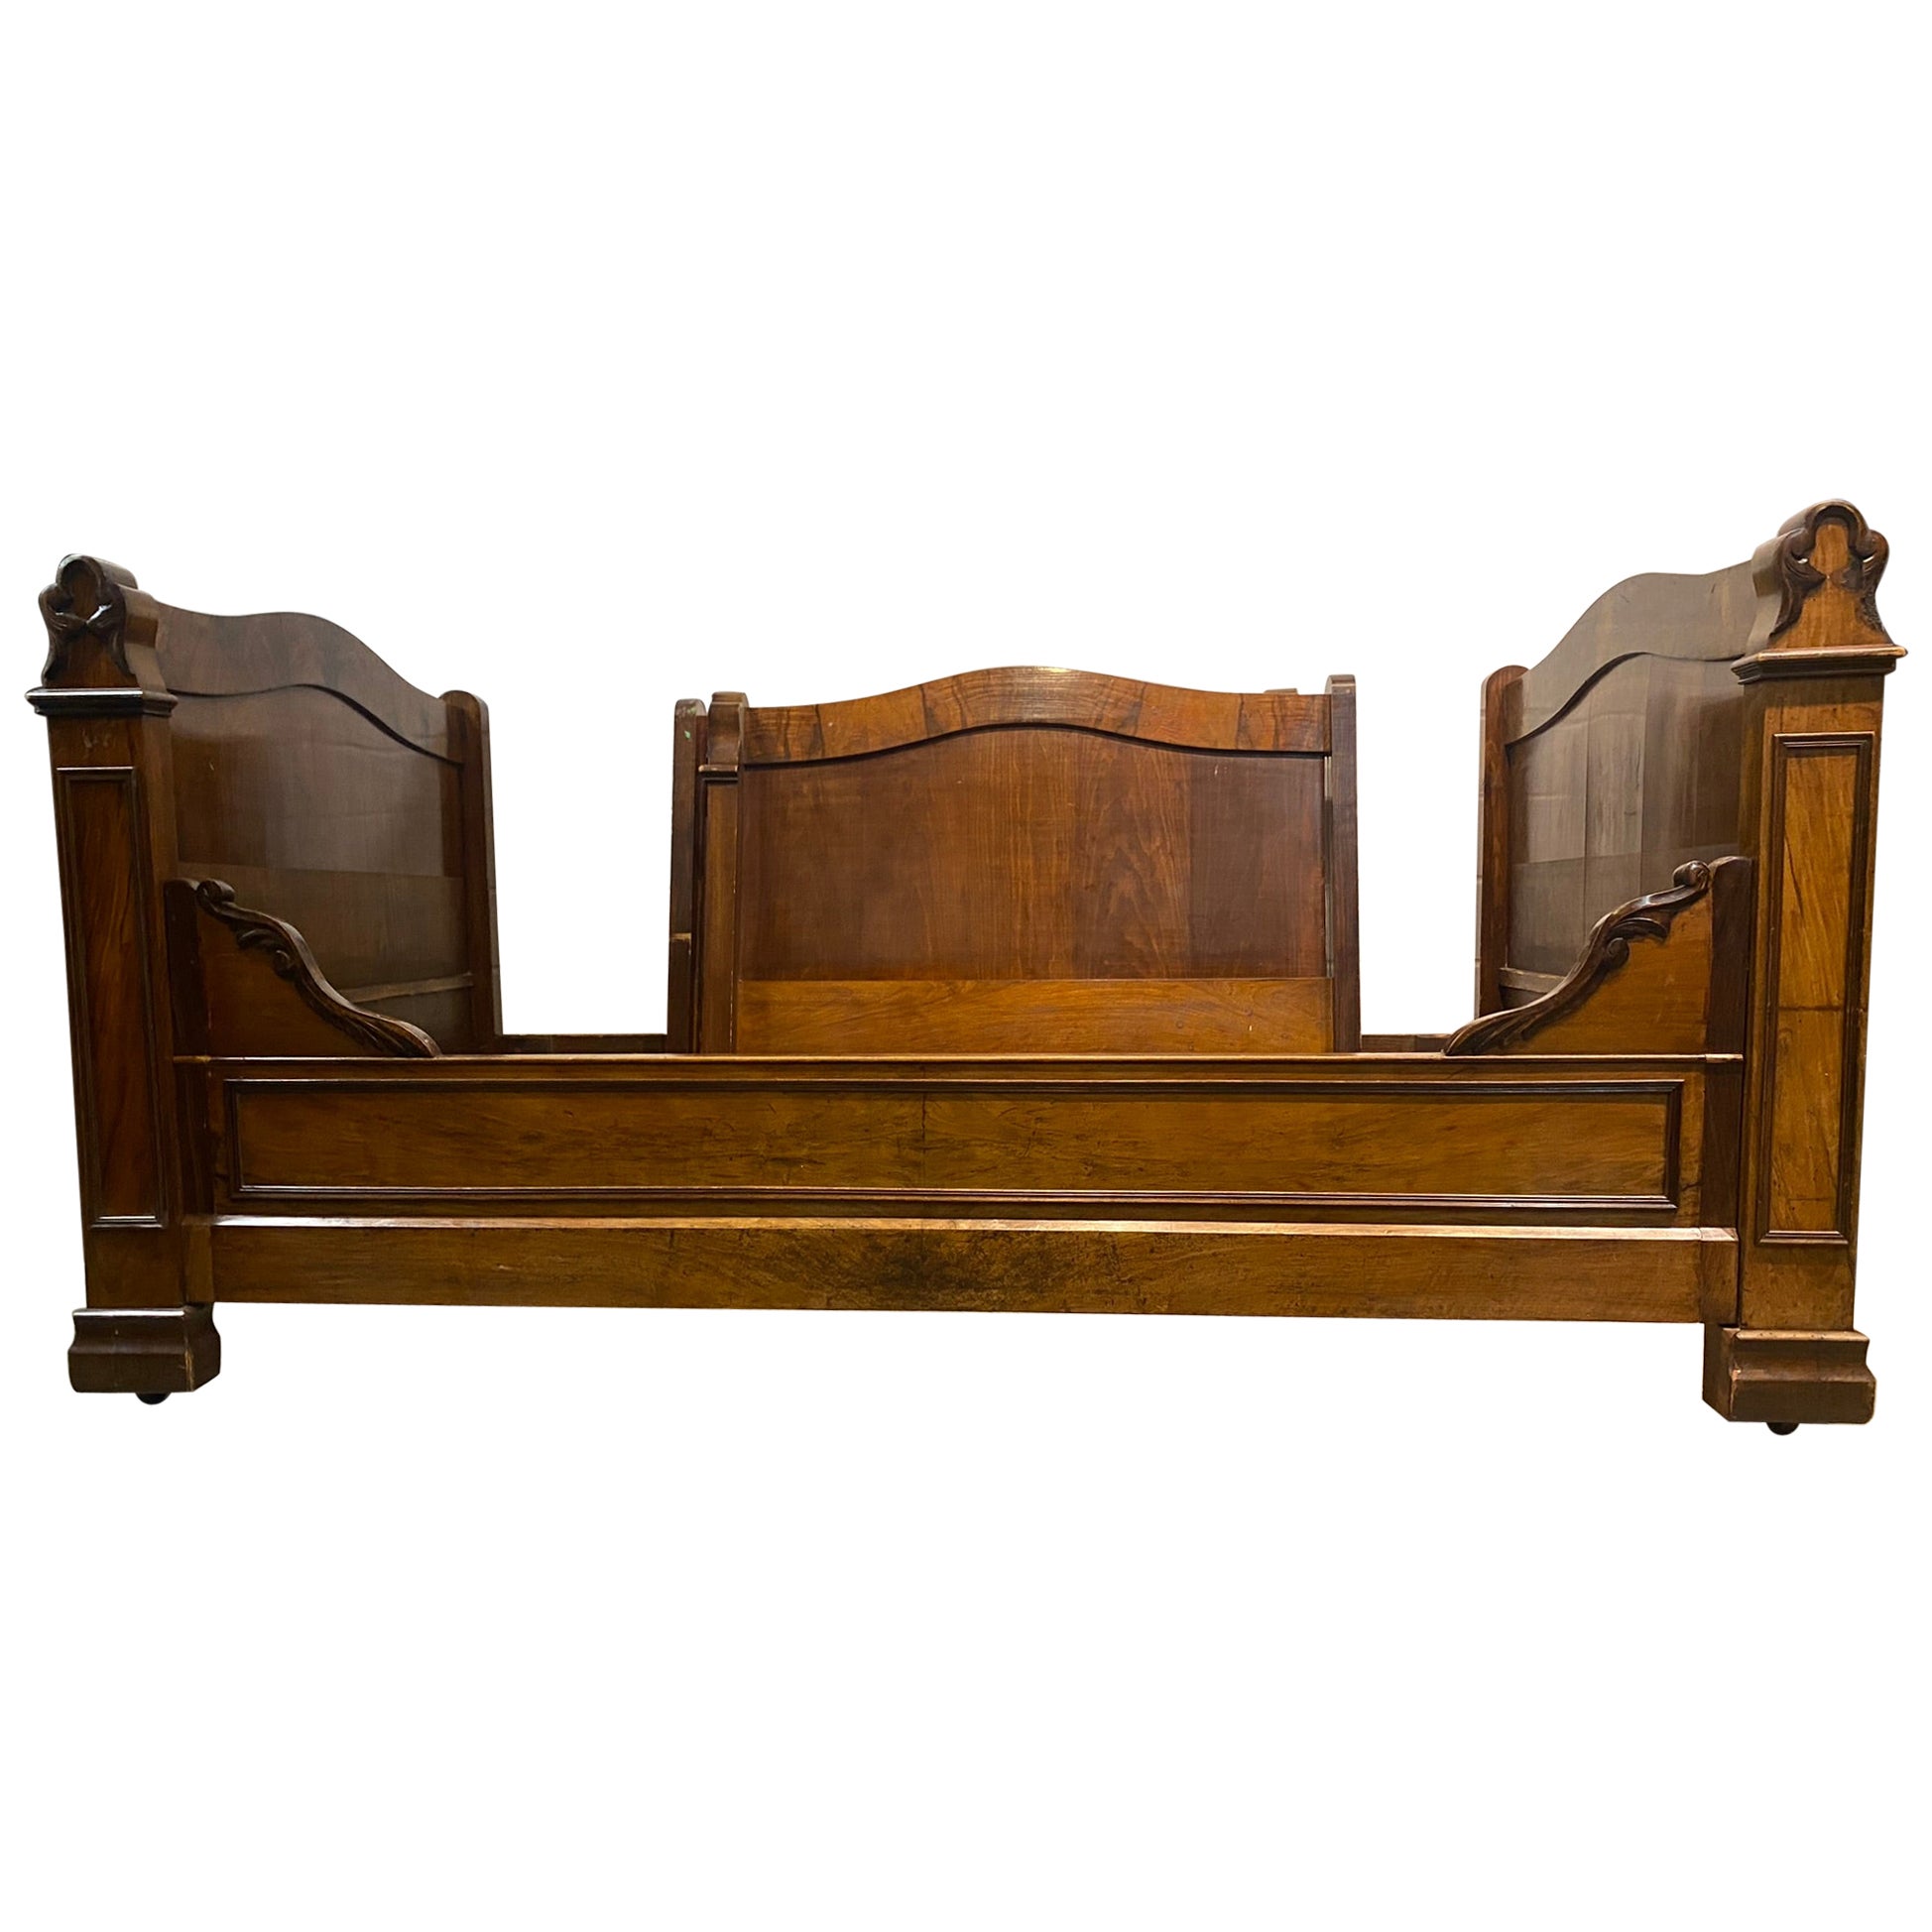 Pair of French Louis Philippe Burl Walnut Daybeds, circa 1880